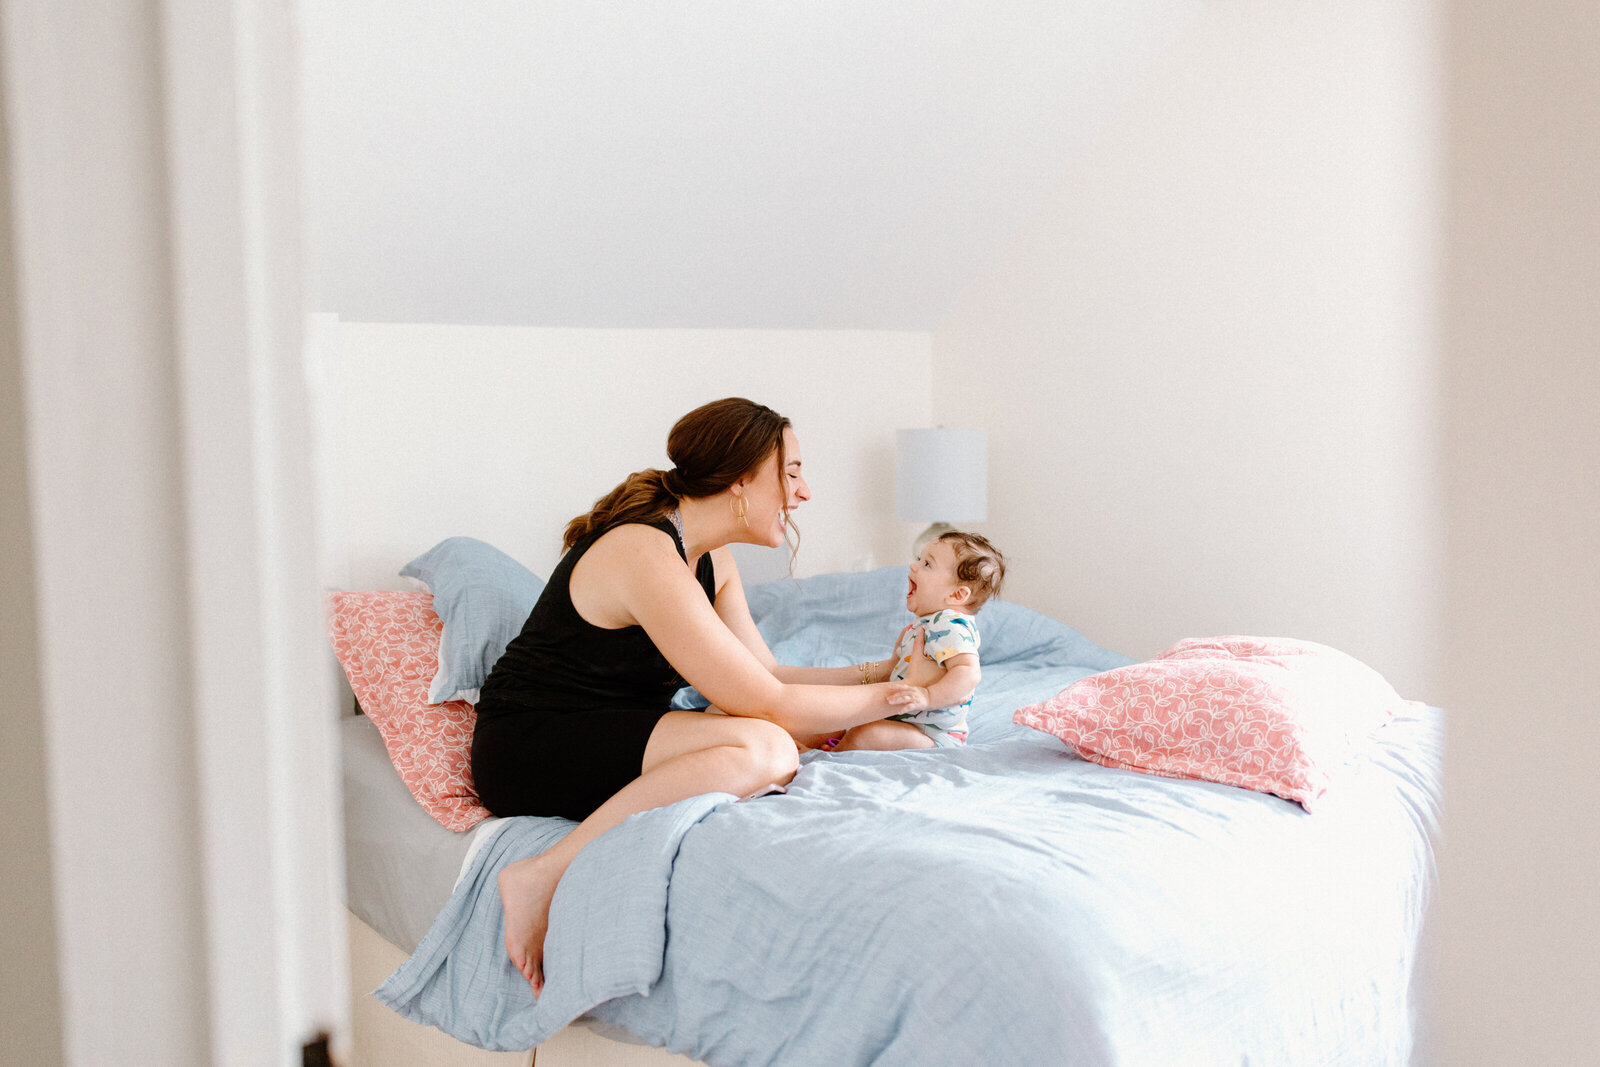 mother plays with baby in bright sunlit bedroom on the bed with a blue bedspread